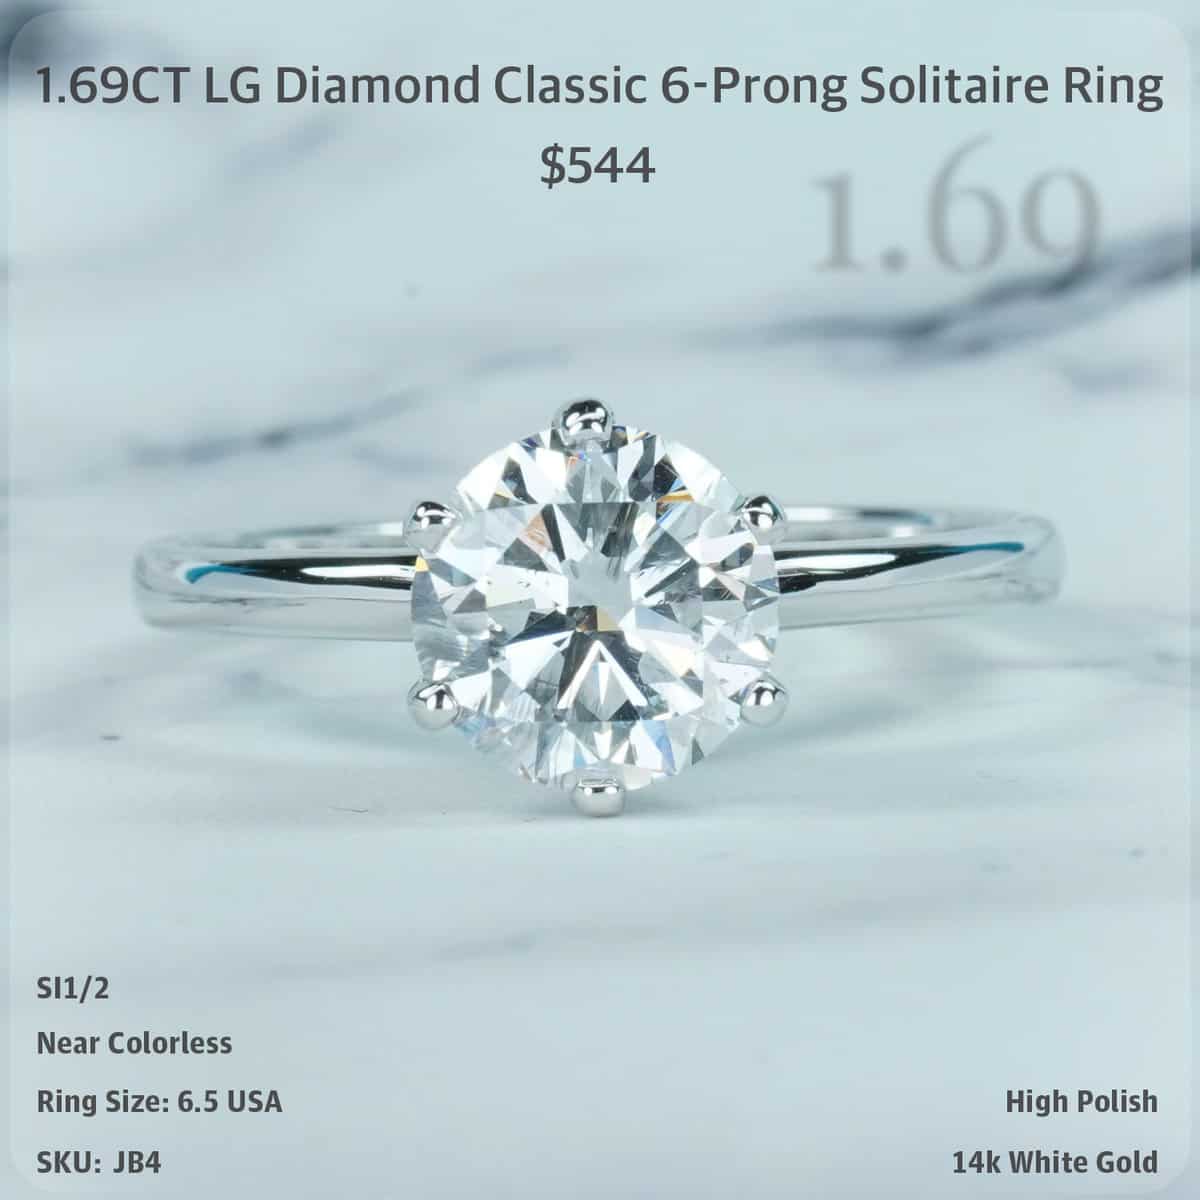 1.69CT LG Diamond Classic 6-Prong Solitaire Ring